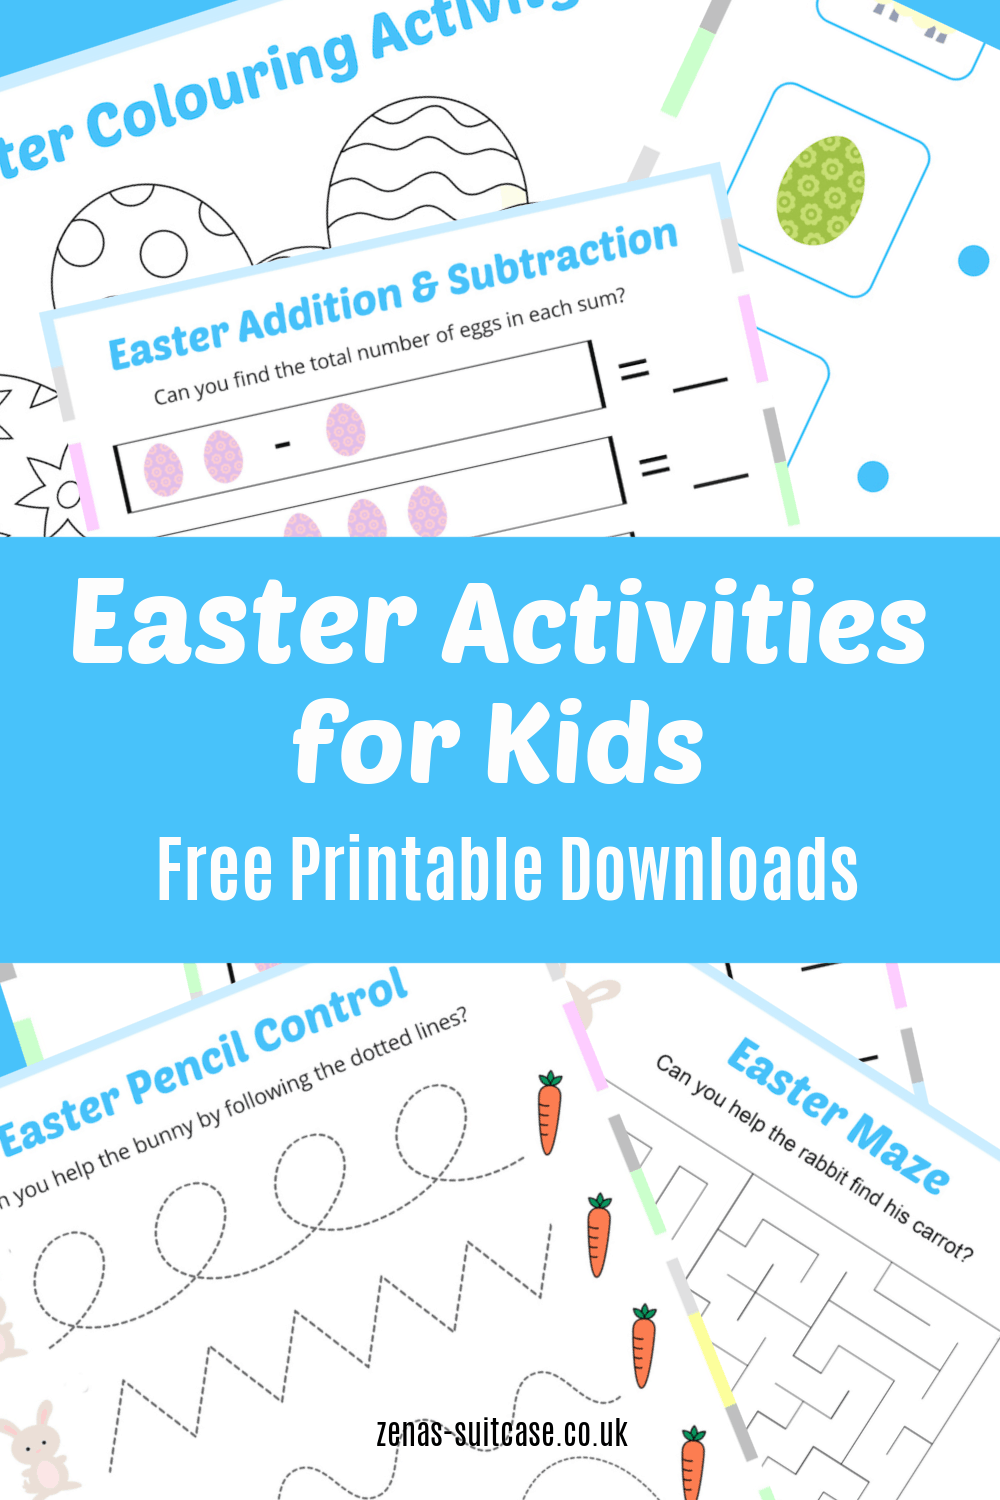 Free Easter printables - kids activities including colouring, word puzzles, maths and more